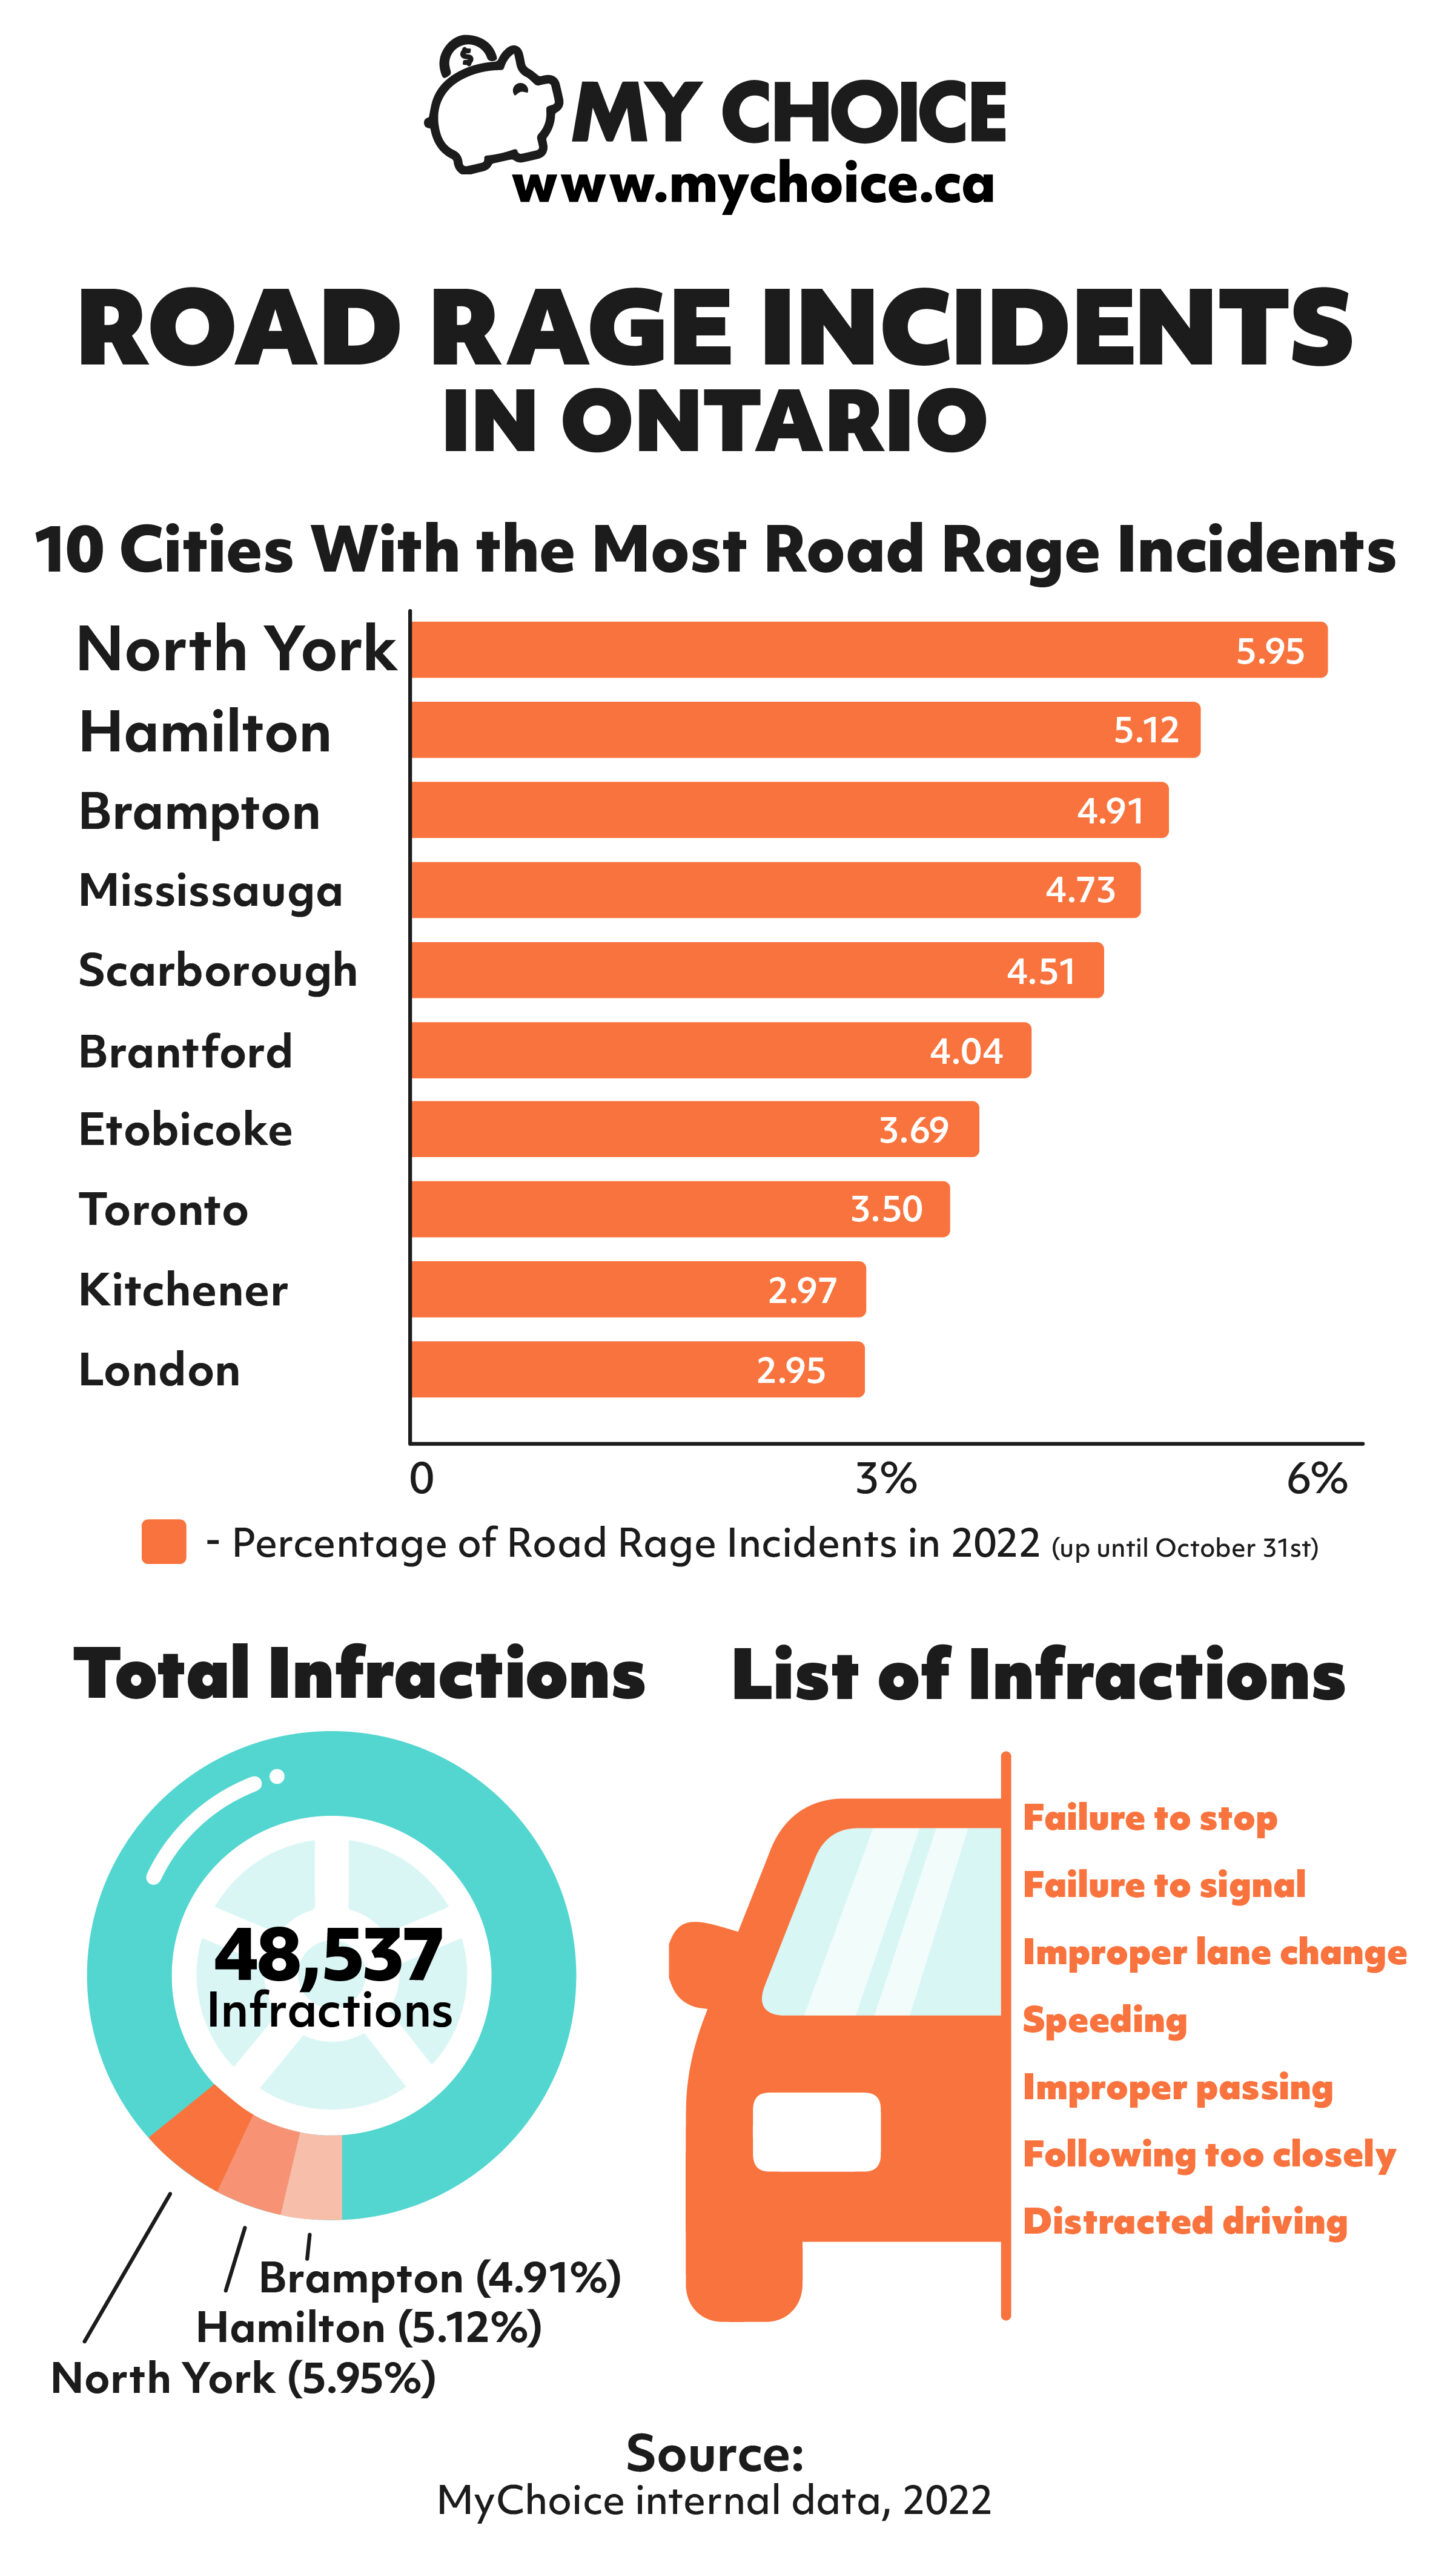 Road Rage Incidents in Ontario 2022